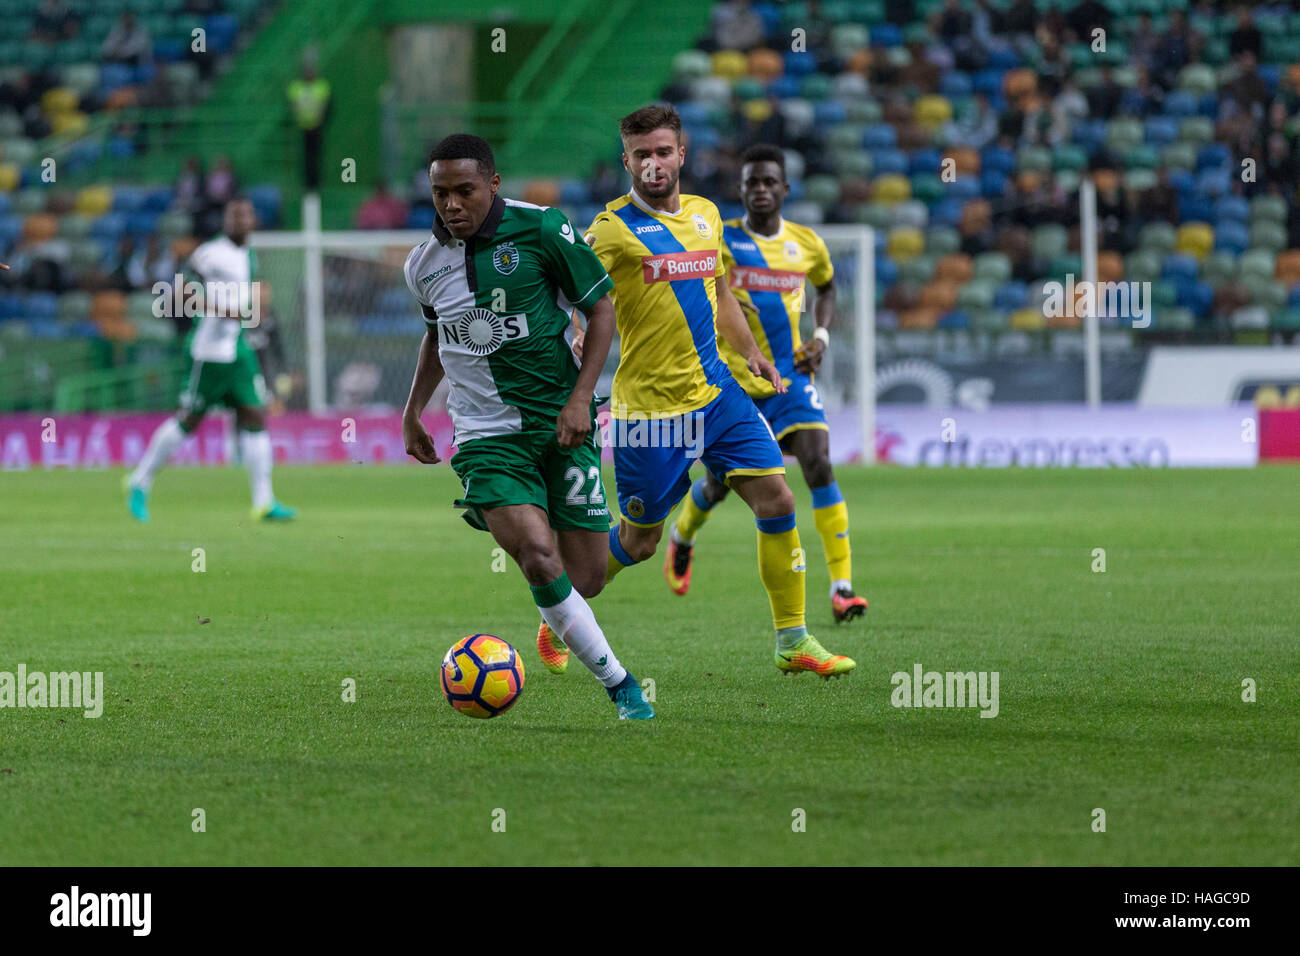 Lisbon, Portugal. 30th Nov, 2016.  Sporting's midfielder from Brazil Elias (22) in action during the game Sporting CP vs FC Arouca Credit:  Alexandre de Sousa/Alamy Live News Stock Photo